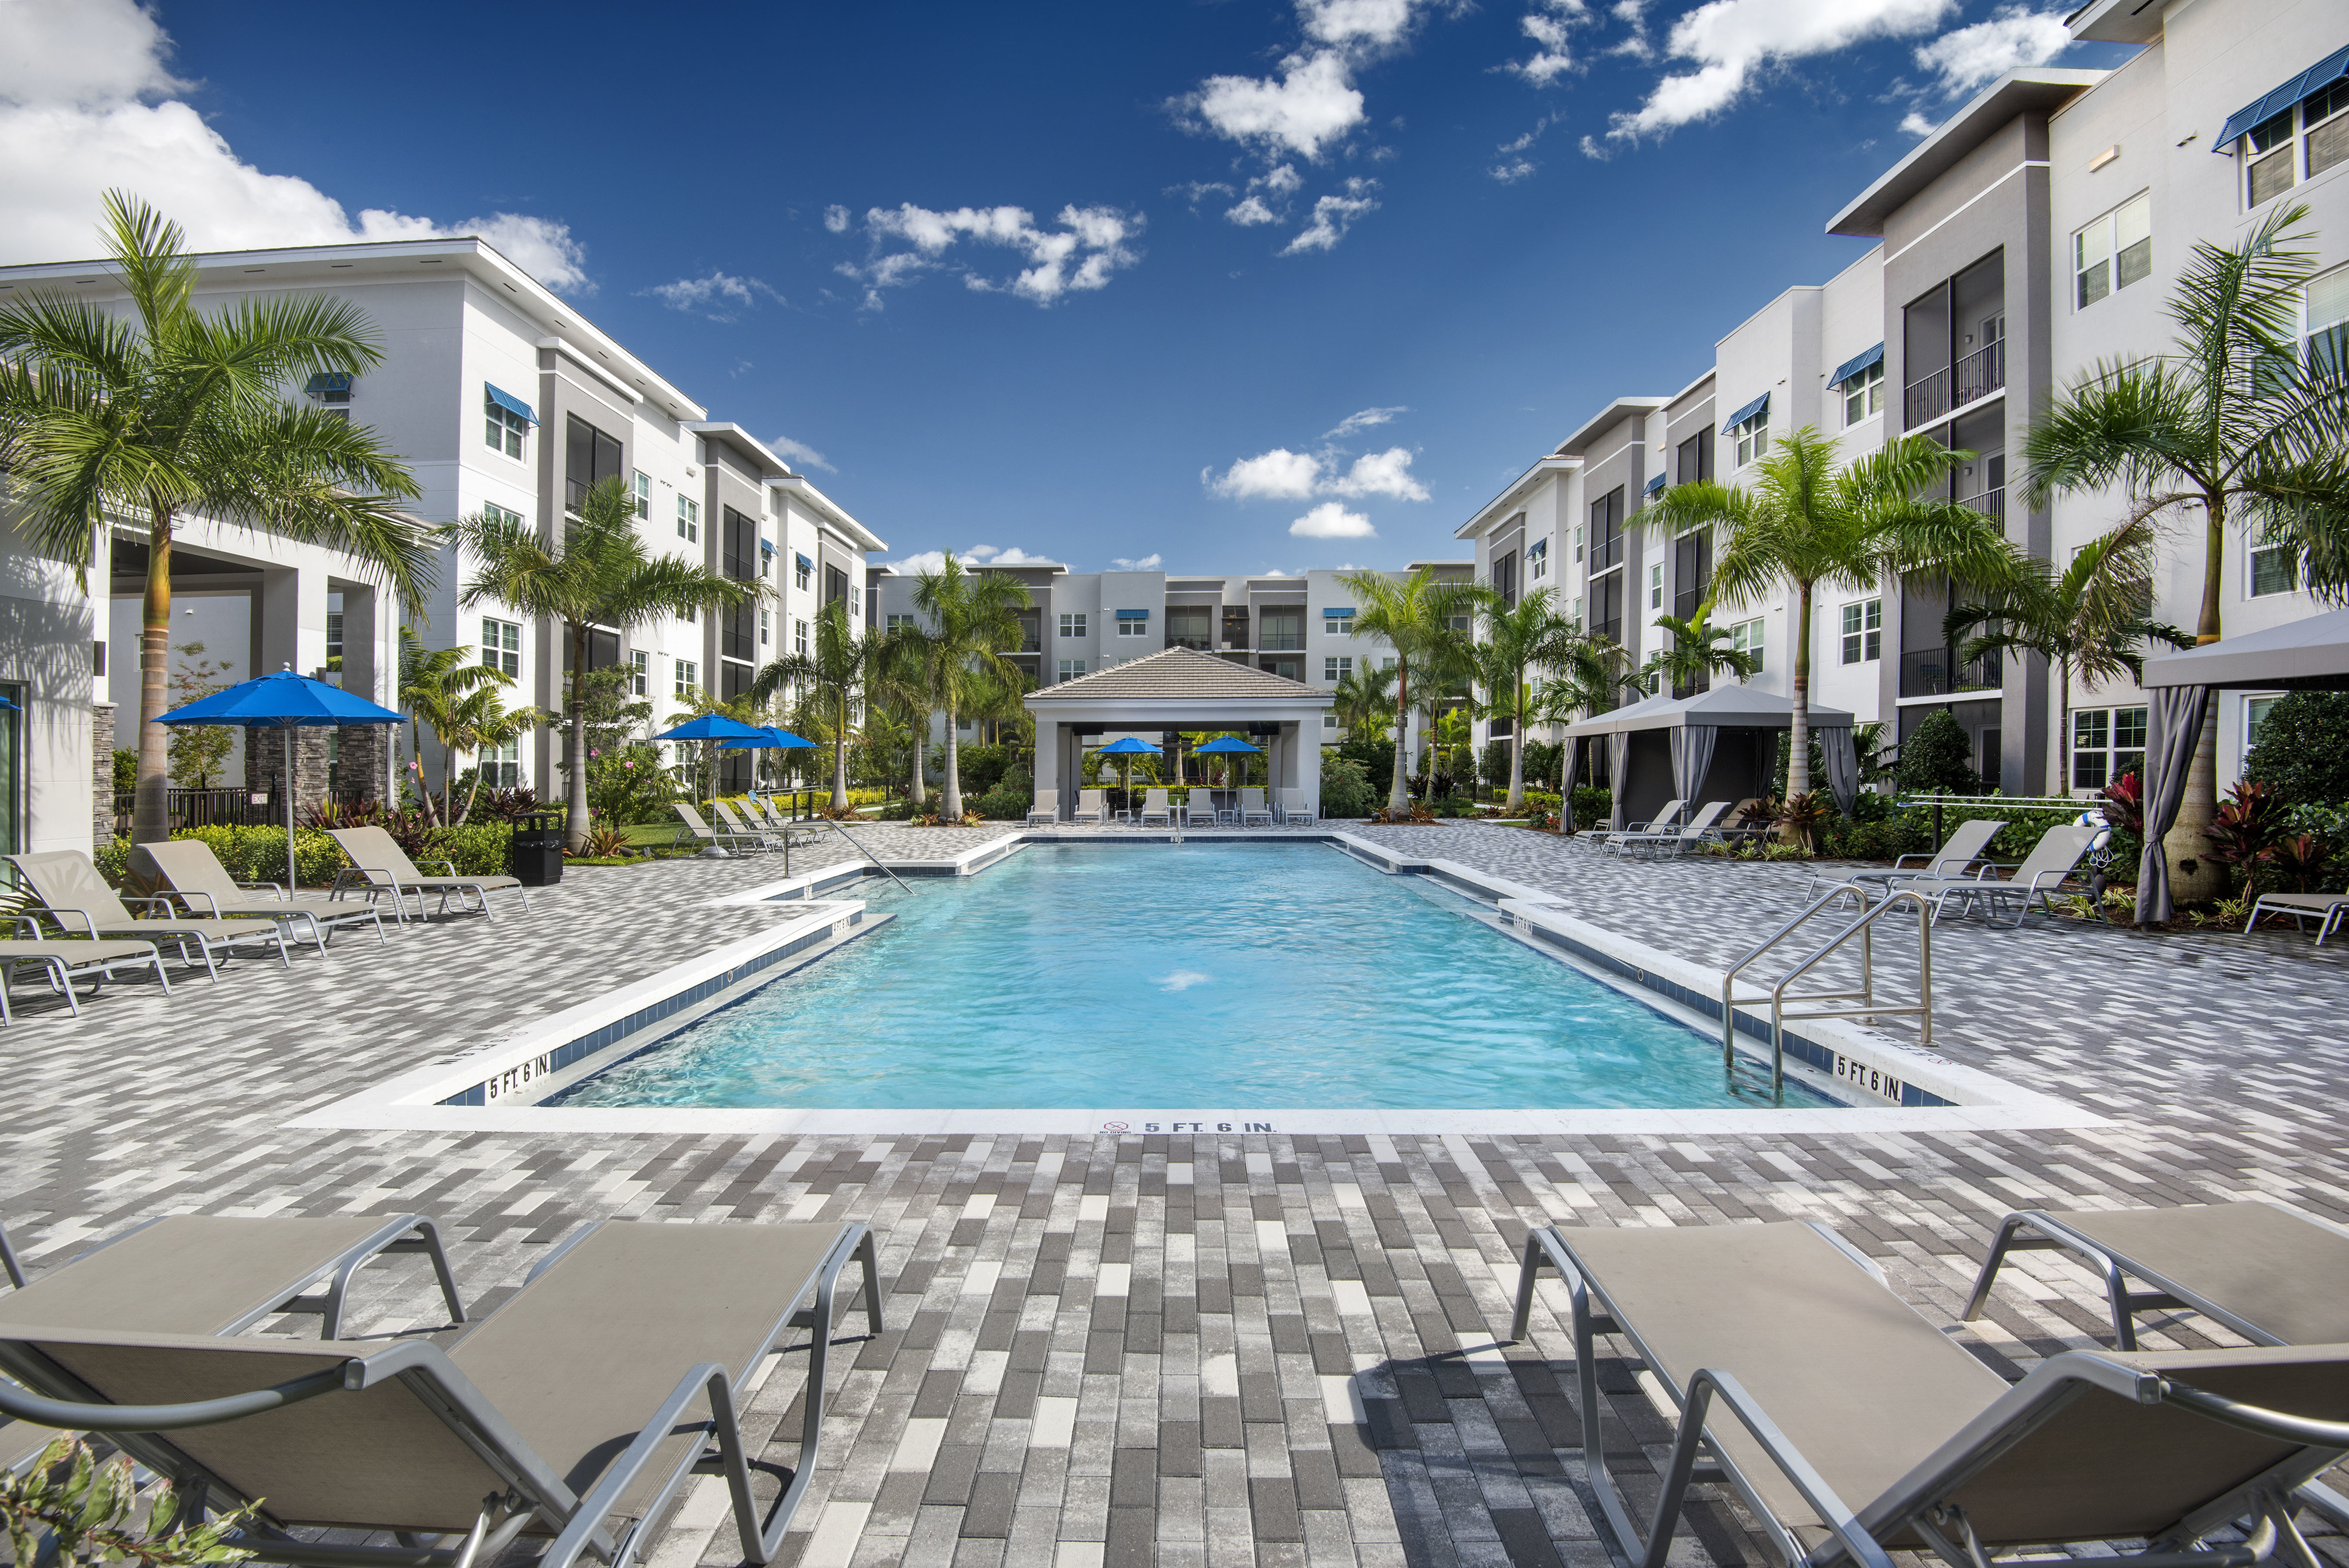 Featured Amenity  | Heated Resort Inspired Pool | Sundeck, Loungers, Cabanas, Building Exterior | Cottonwood West Palm Apartments